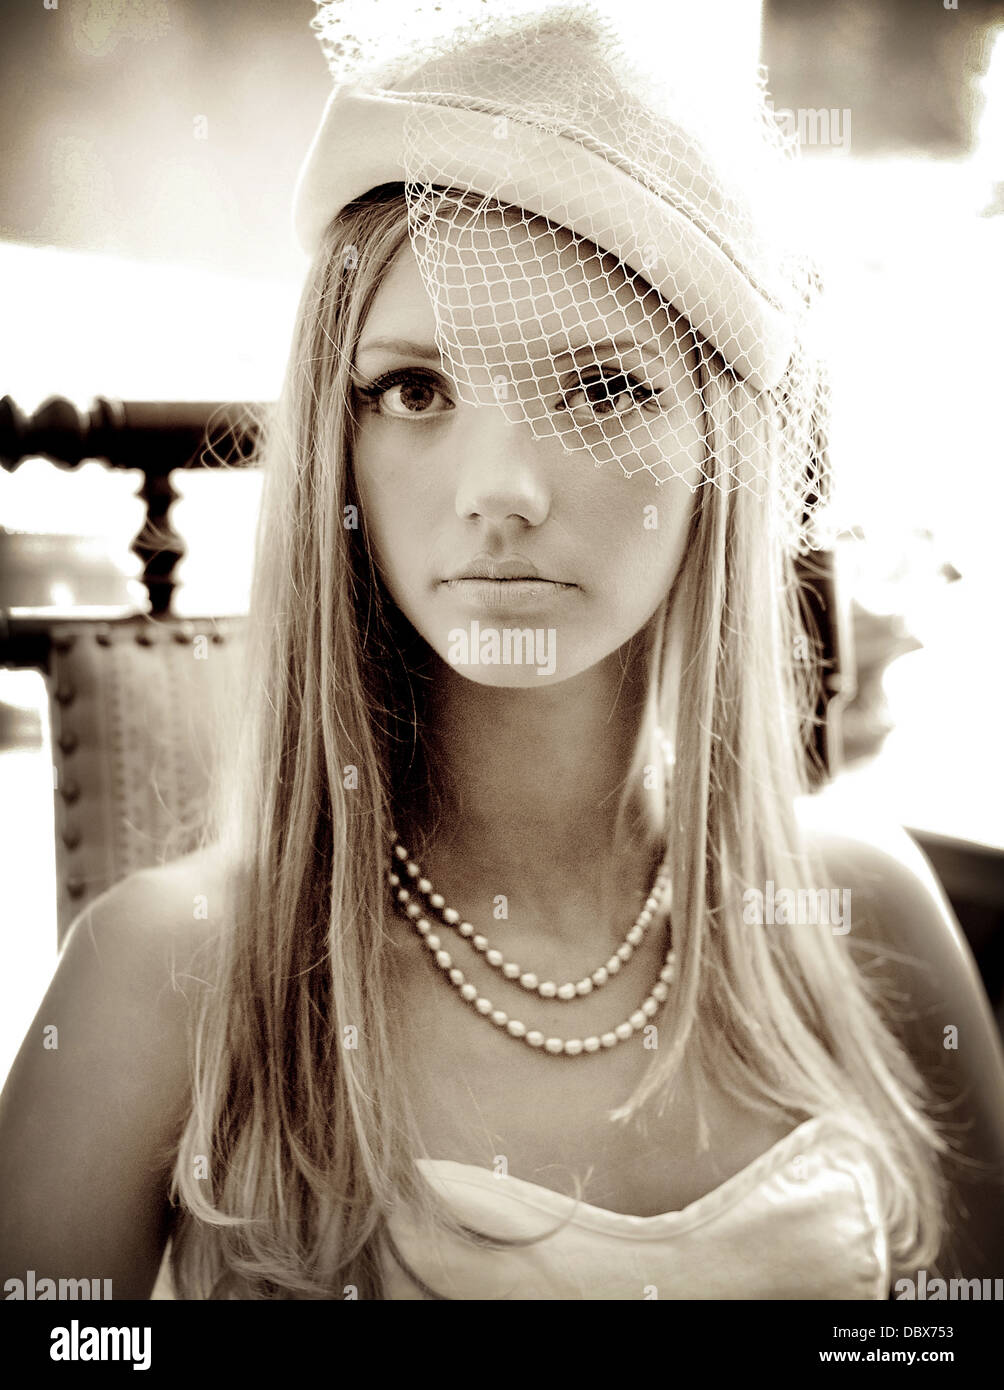 A vintage 1920's inspired photograph of a blonde woman in elegant pearls and a veiled hat Stock Photo